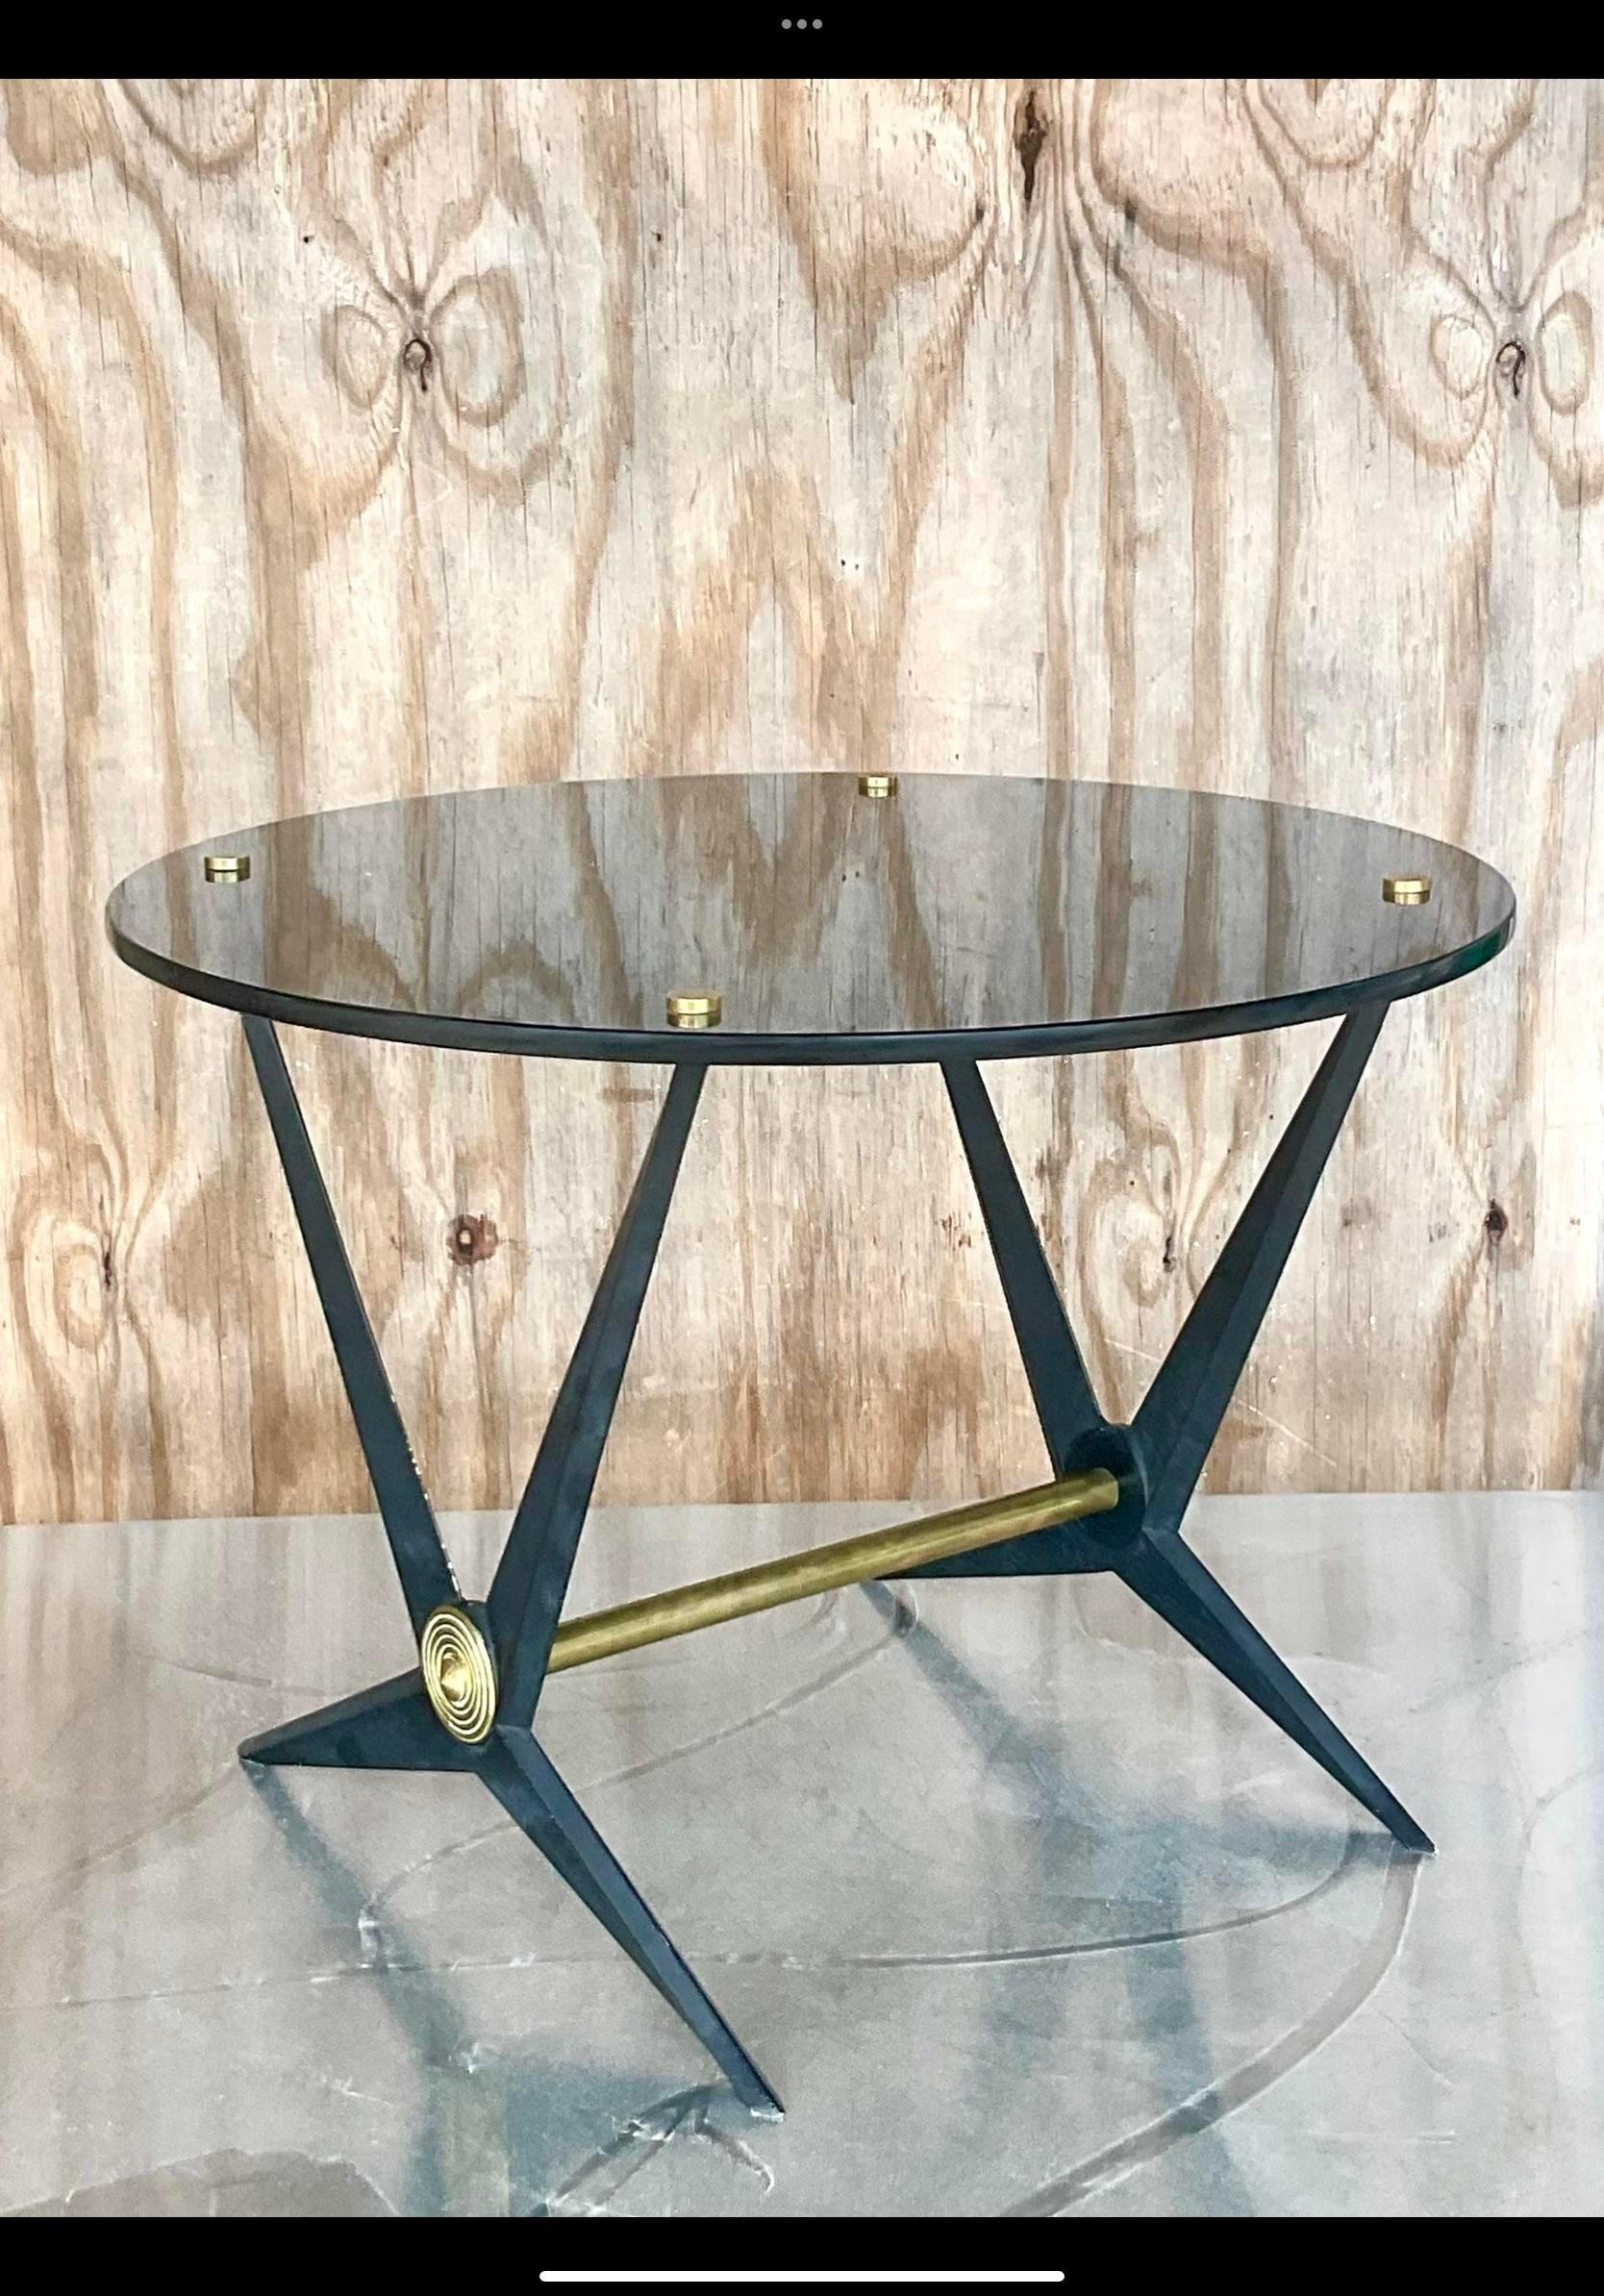 Spectacular vintage Italian cocktail table. Made by the iconic designer Angelo Ostuni. Chic cast aluminum with a black enameled surface. Smoked glass and brass hardware. A real collectors gem. Acquired from a Palm Beach estate.